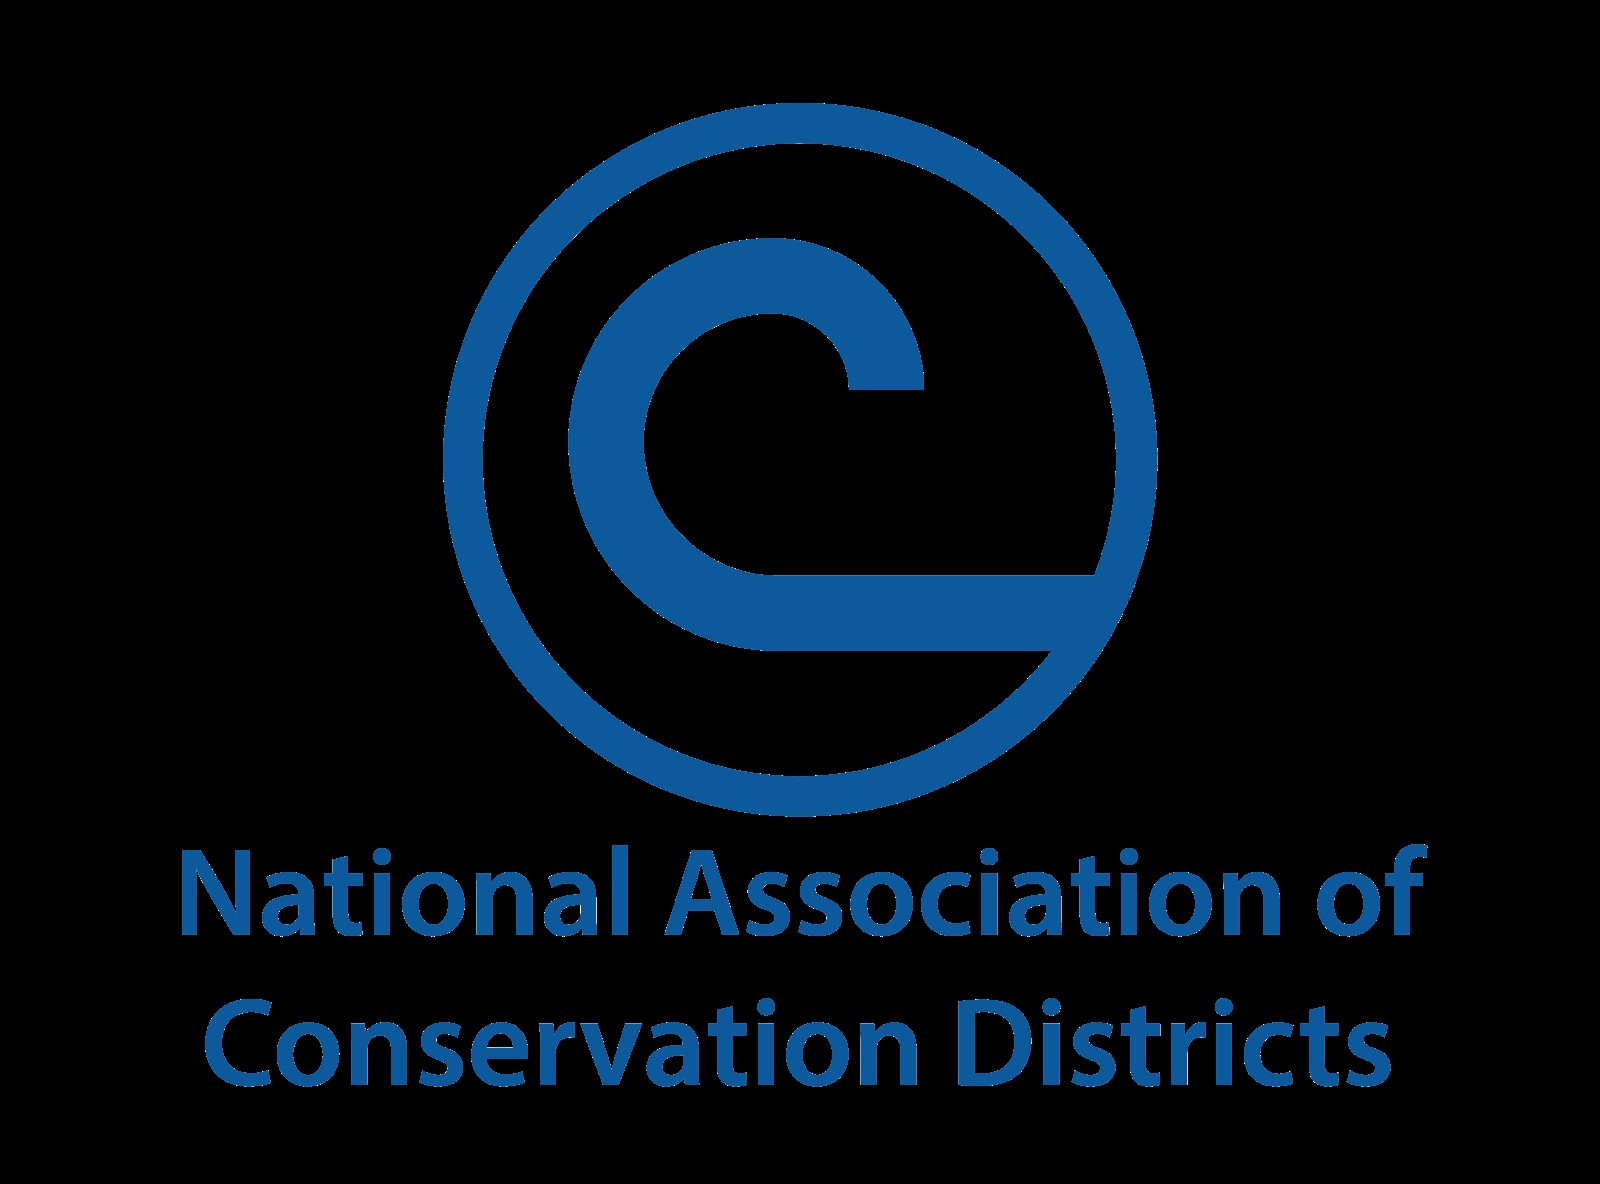 NACD Concerned USDA Reorganization Could Negatively Impact Those Reliant on NRCS Services